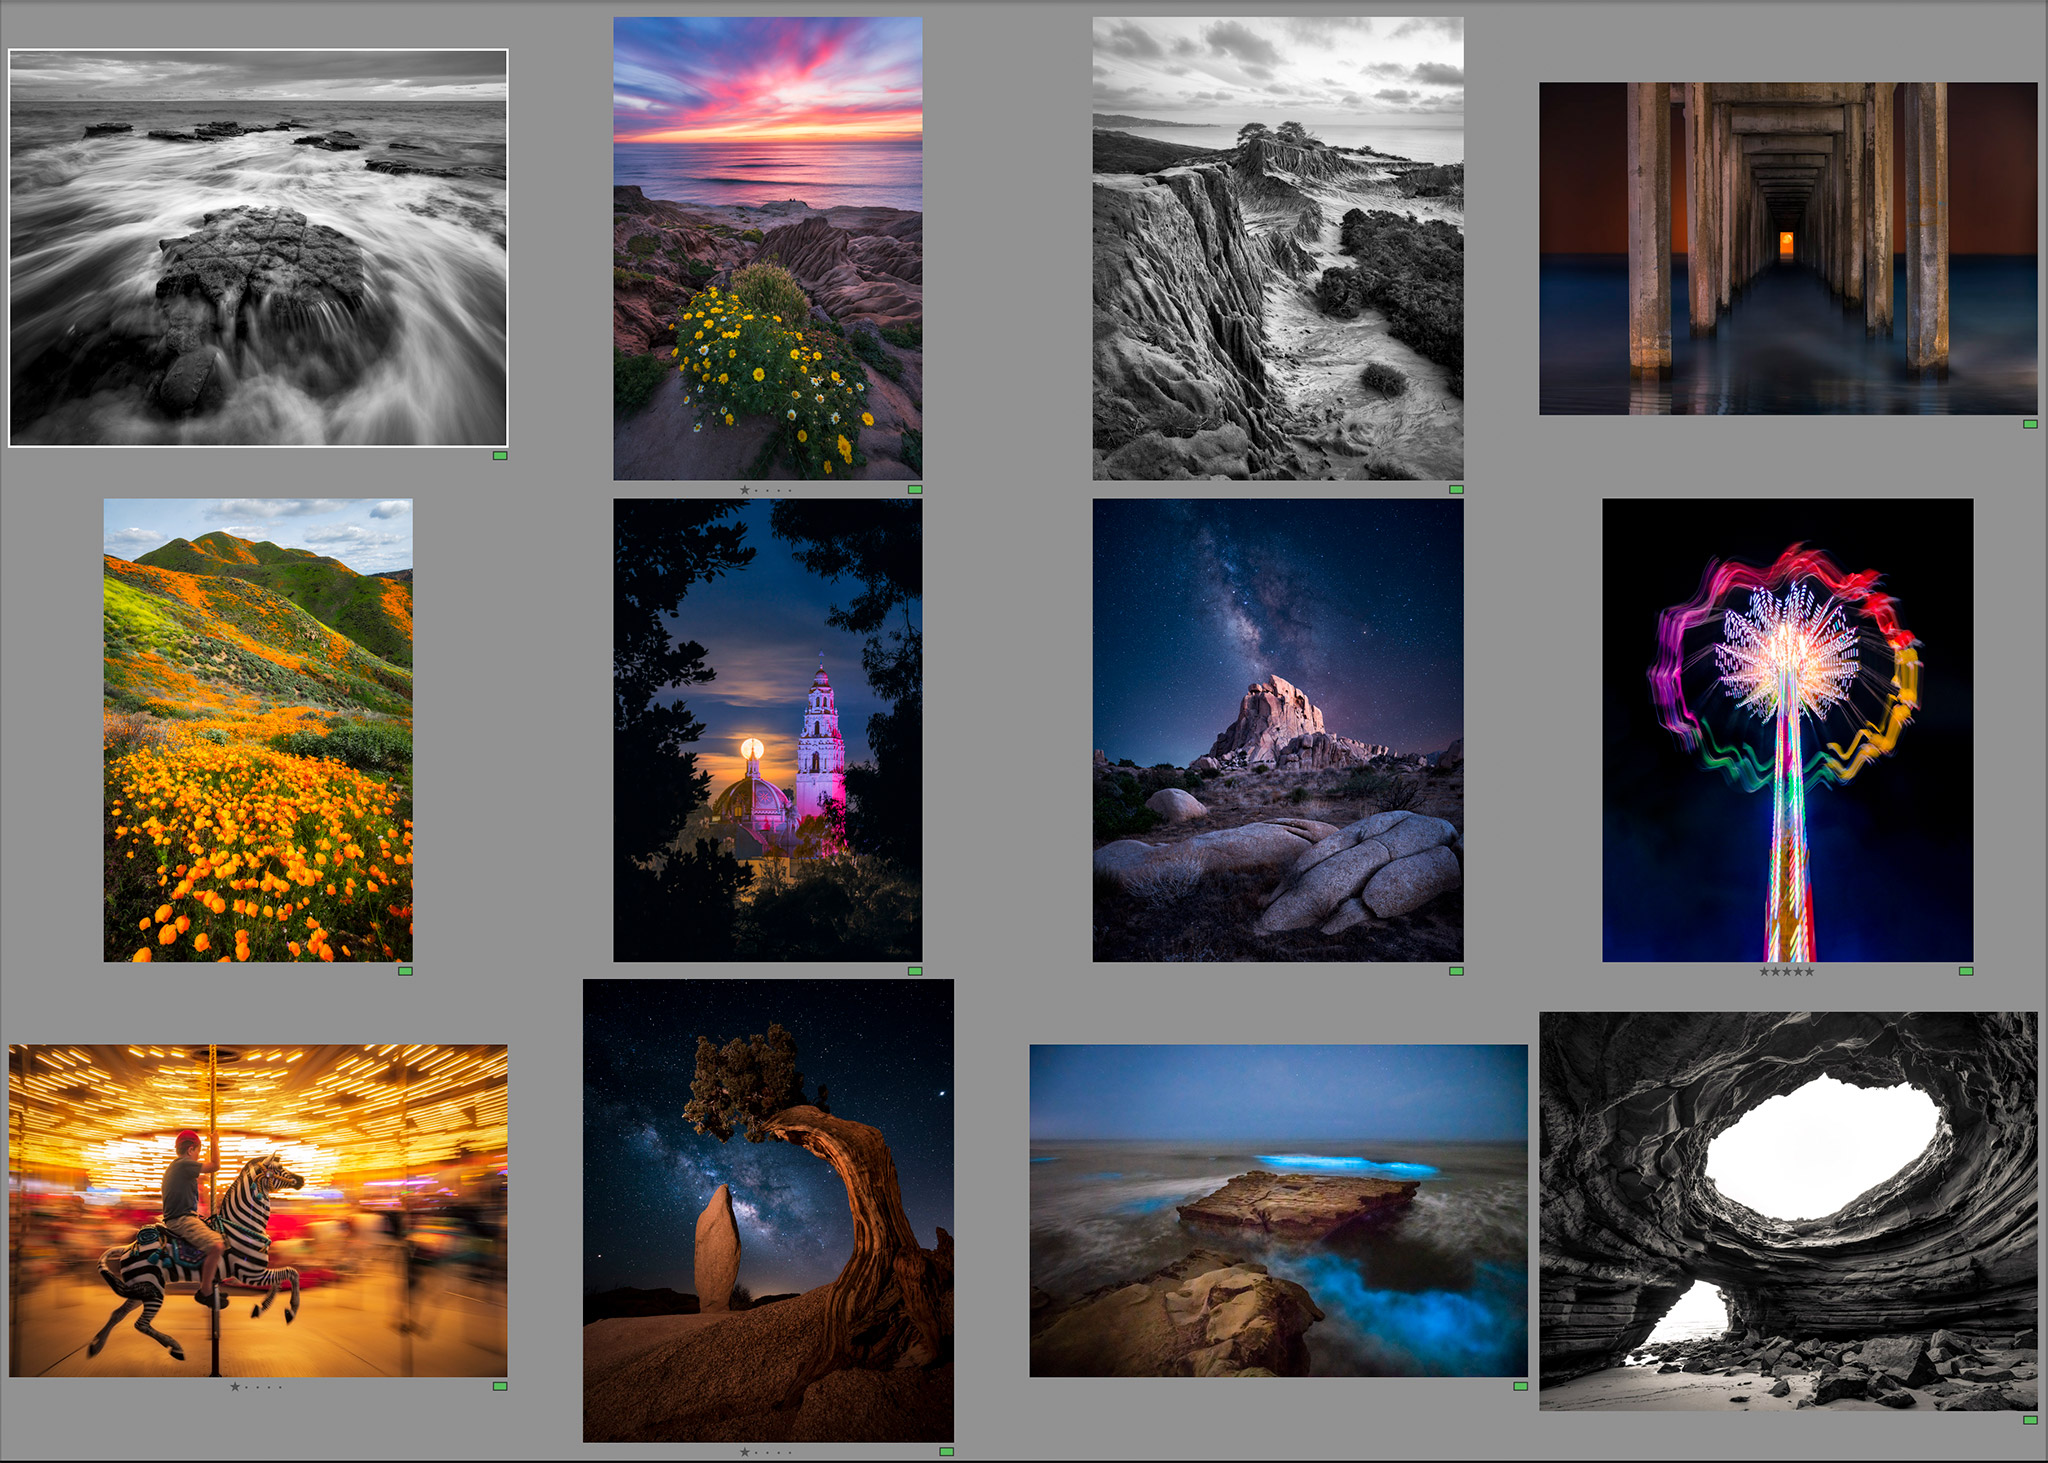 The 12 images I submitted to the San Diego Fair Photo Exhibit